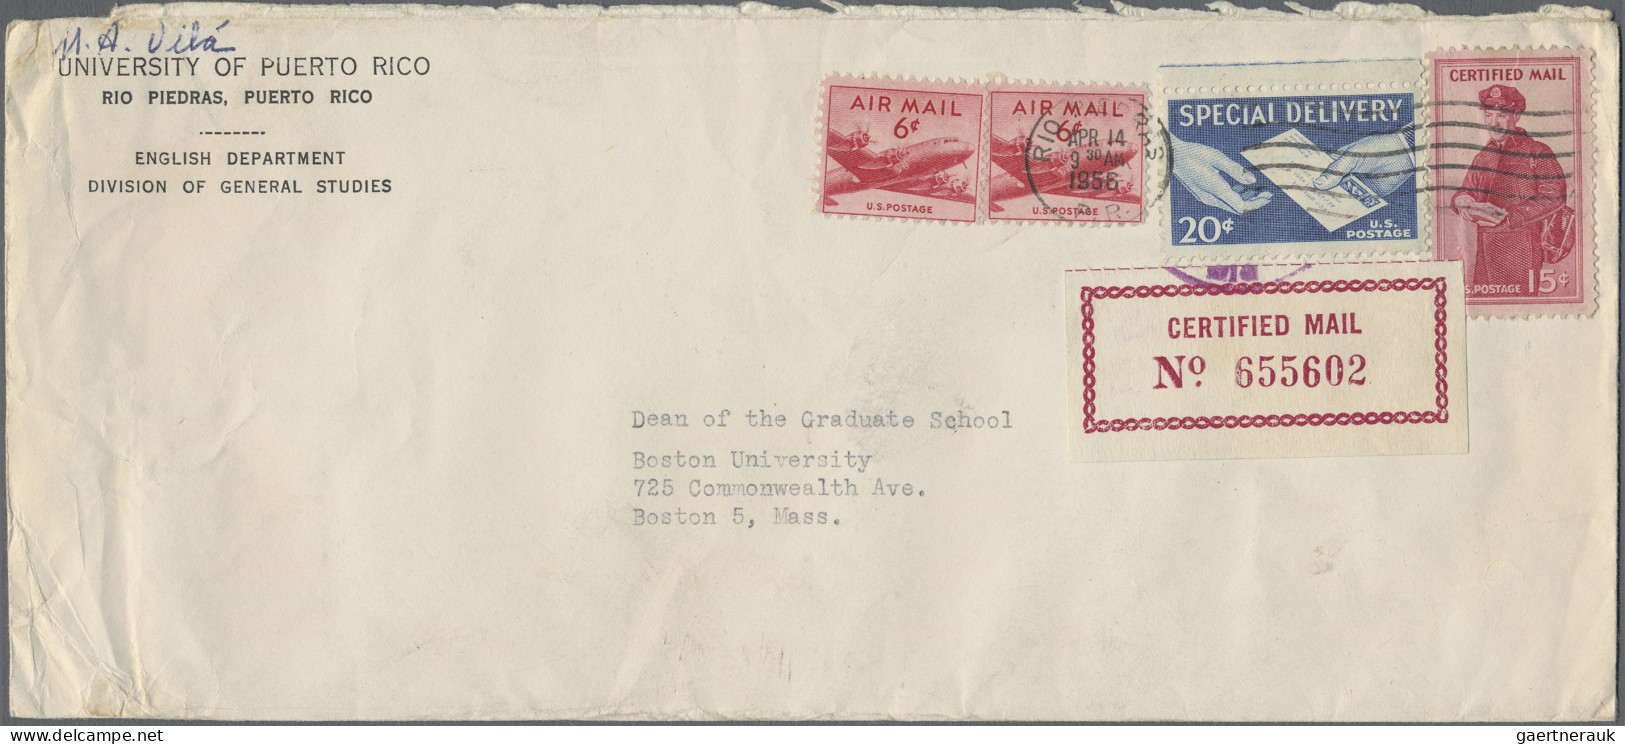 United States: 1912/1971, lot of 26 covers showing special features, thereof 24